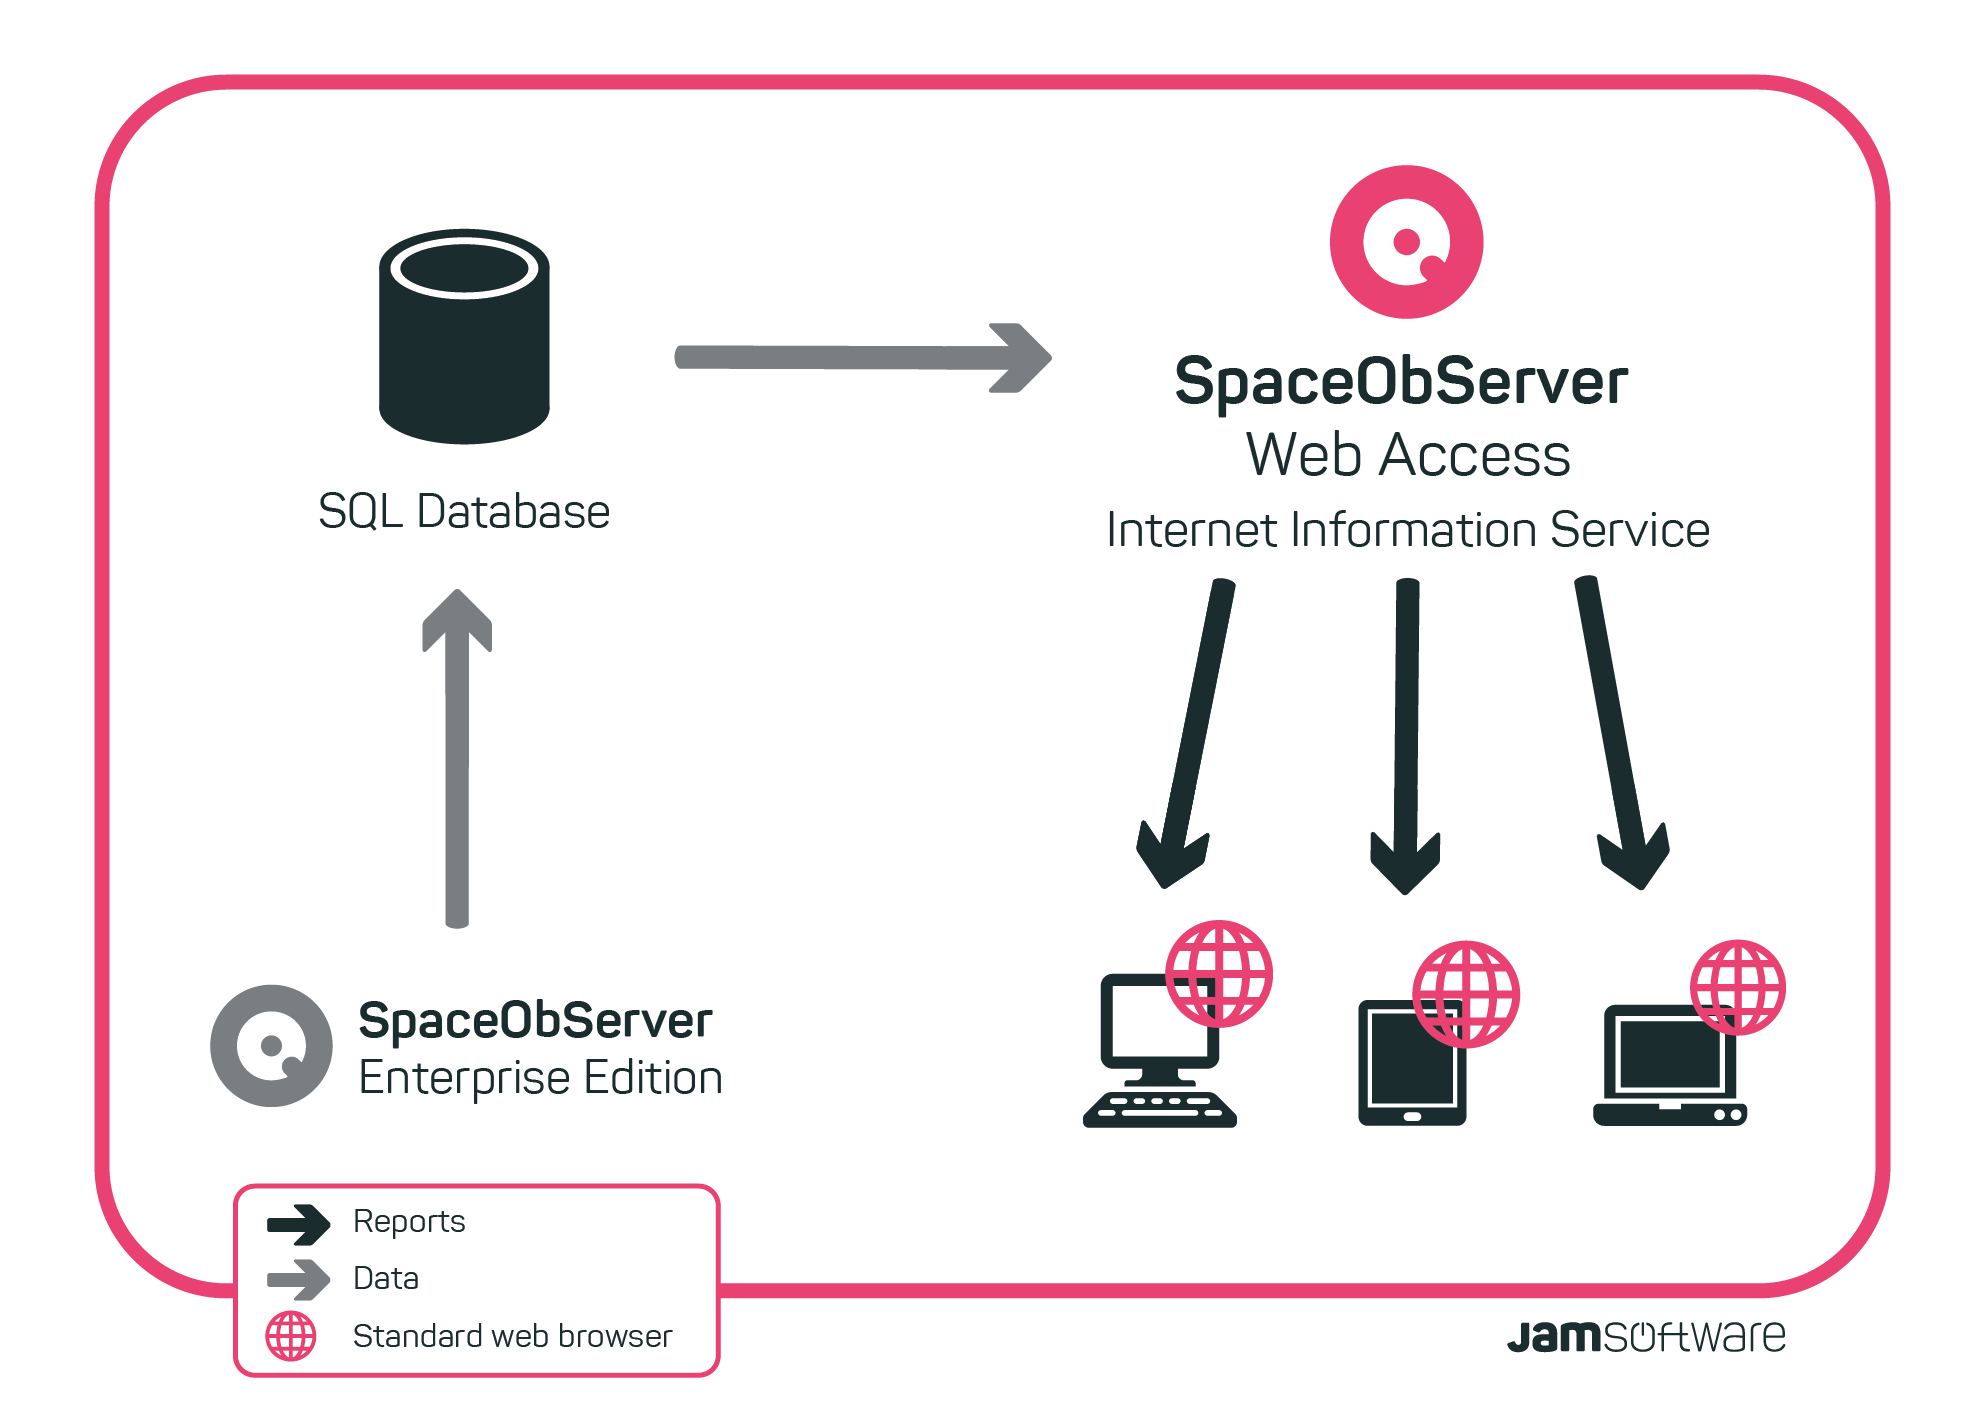 Chart showing functioning of SpaceObServer and Web Access